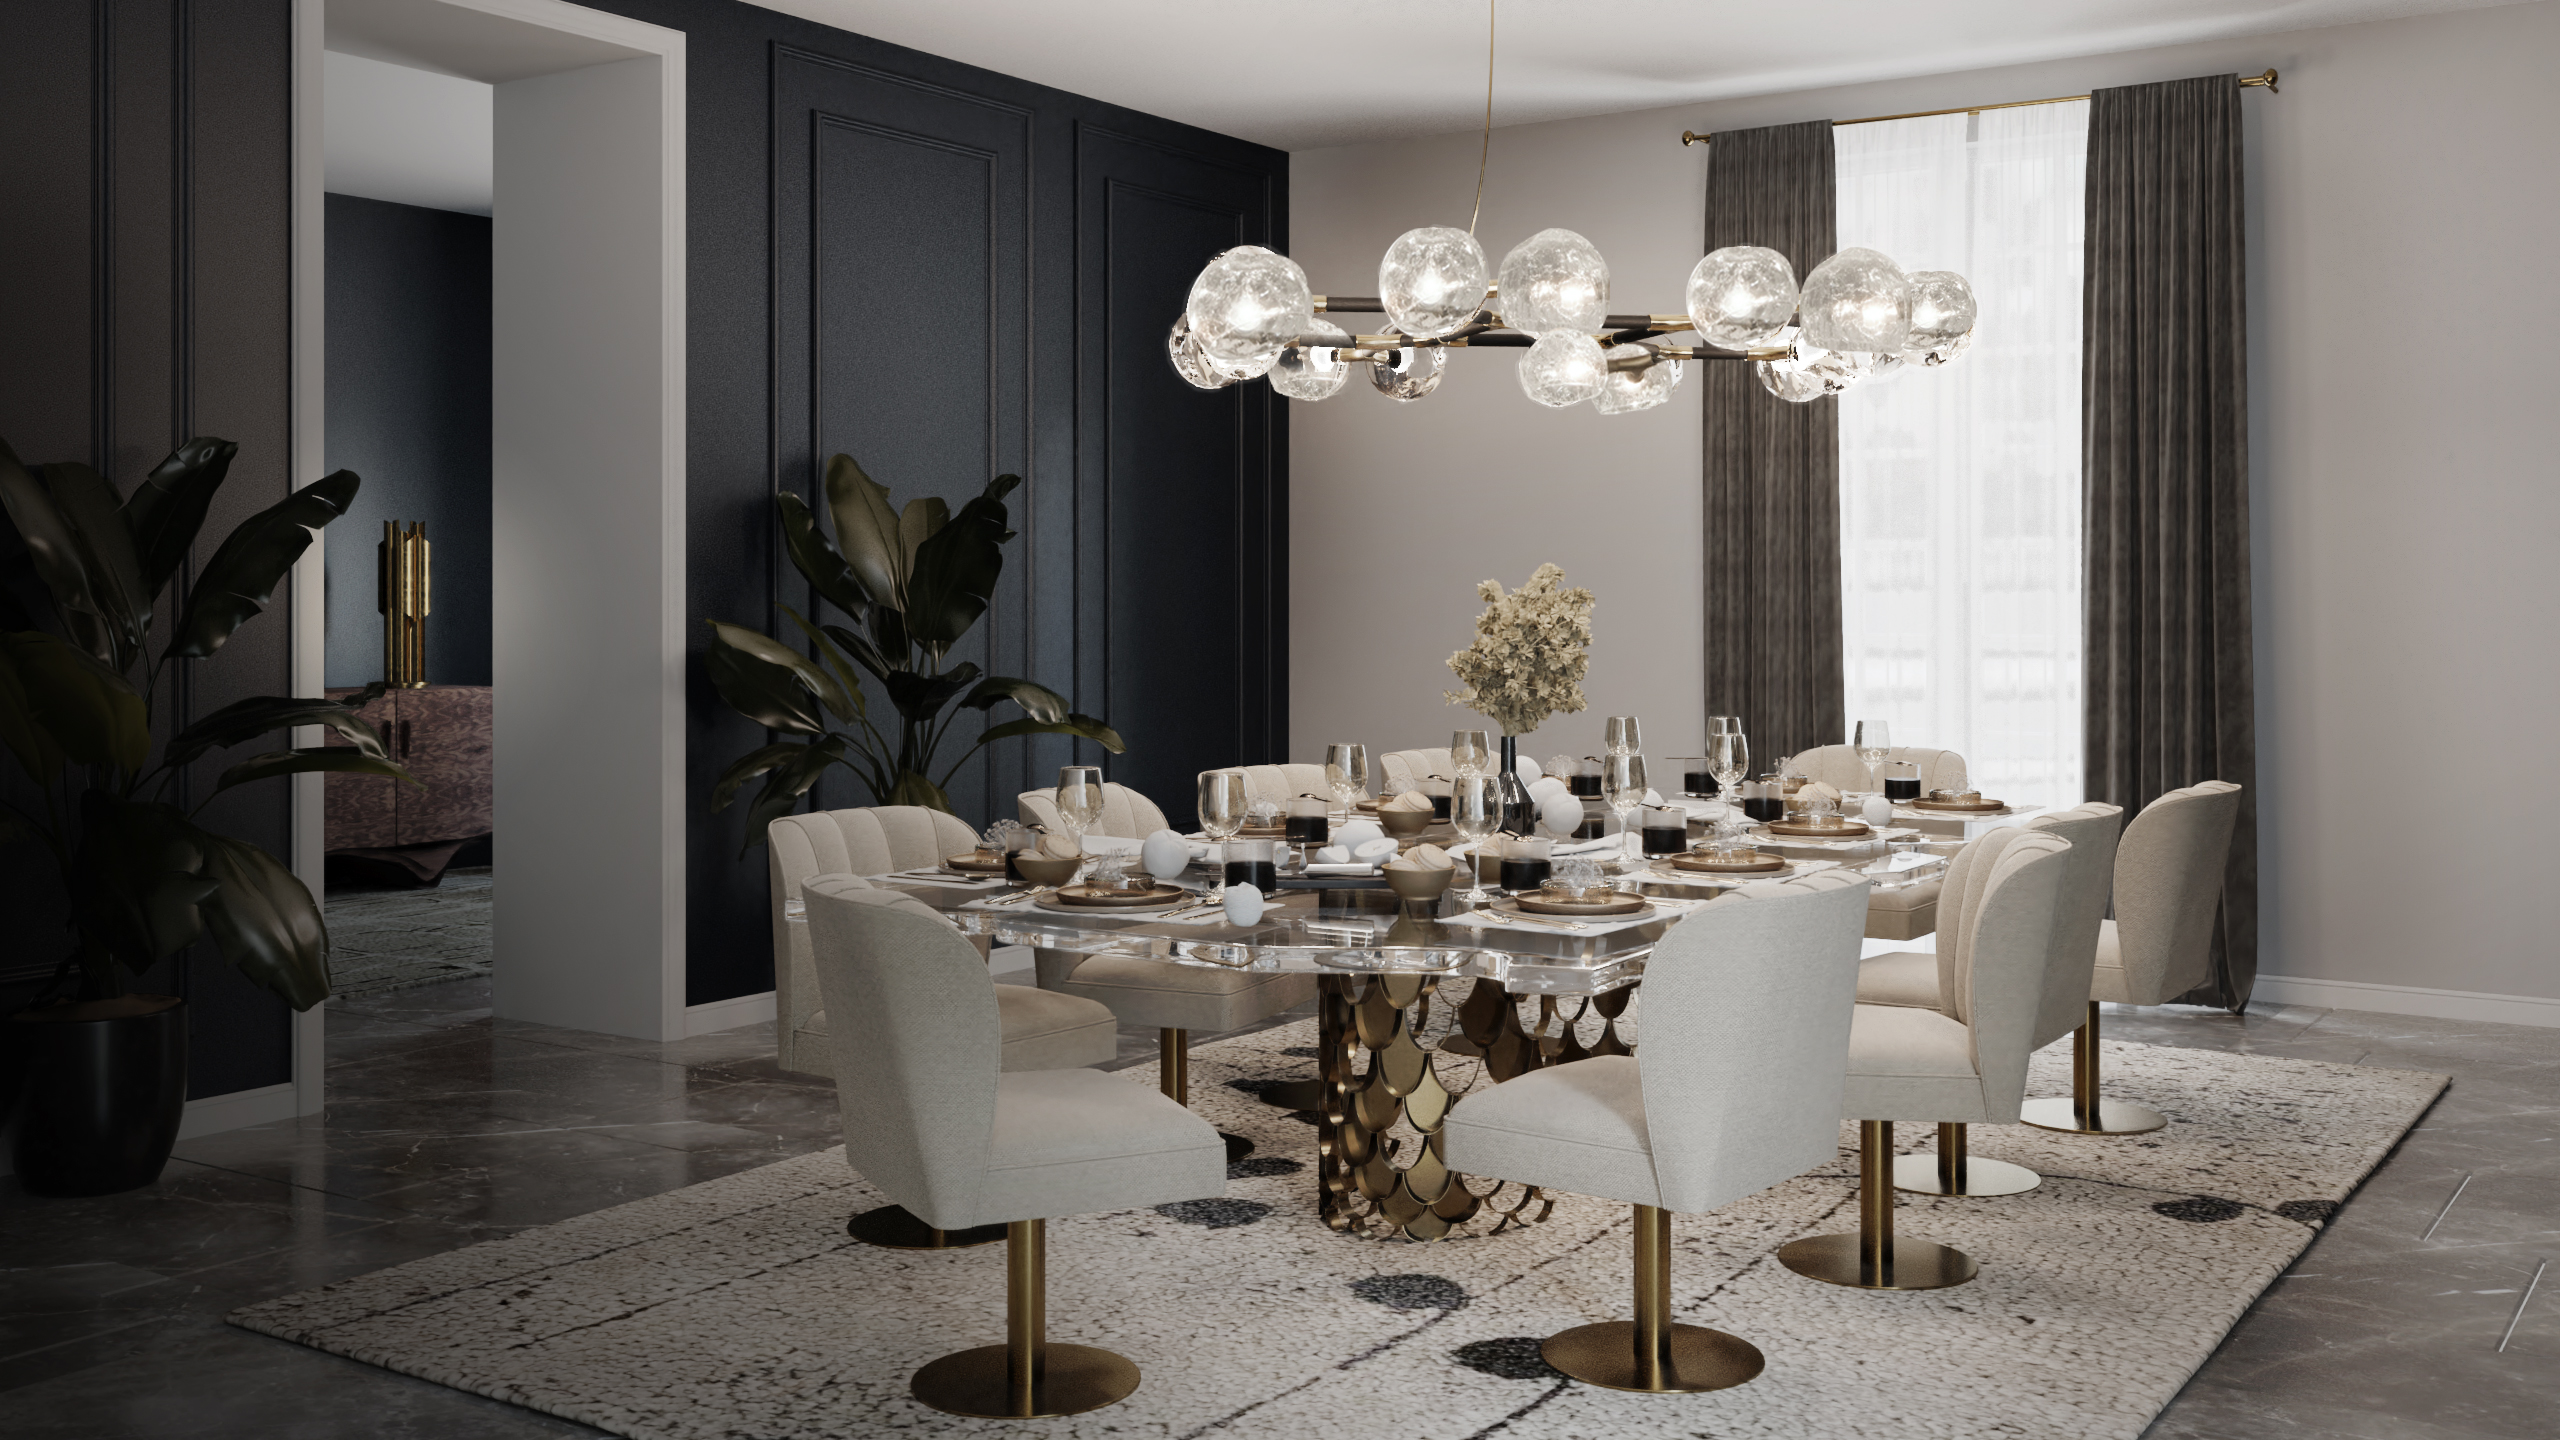 winter trends 2022: The POPPY RUG is a hand-knotted contemporary rug inspired by the secular flower of the same name. This rug displays delicacy and elegance with a strong link to nature. It is ideal for a modern contemporary dining room.